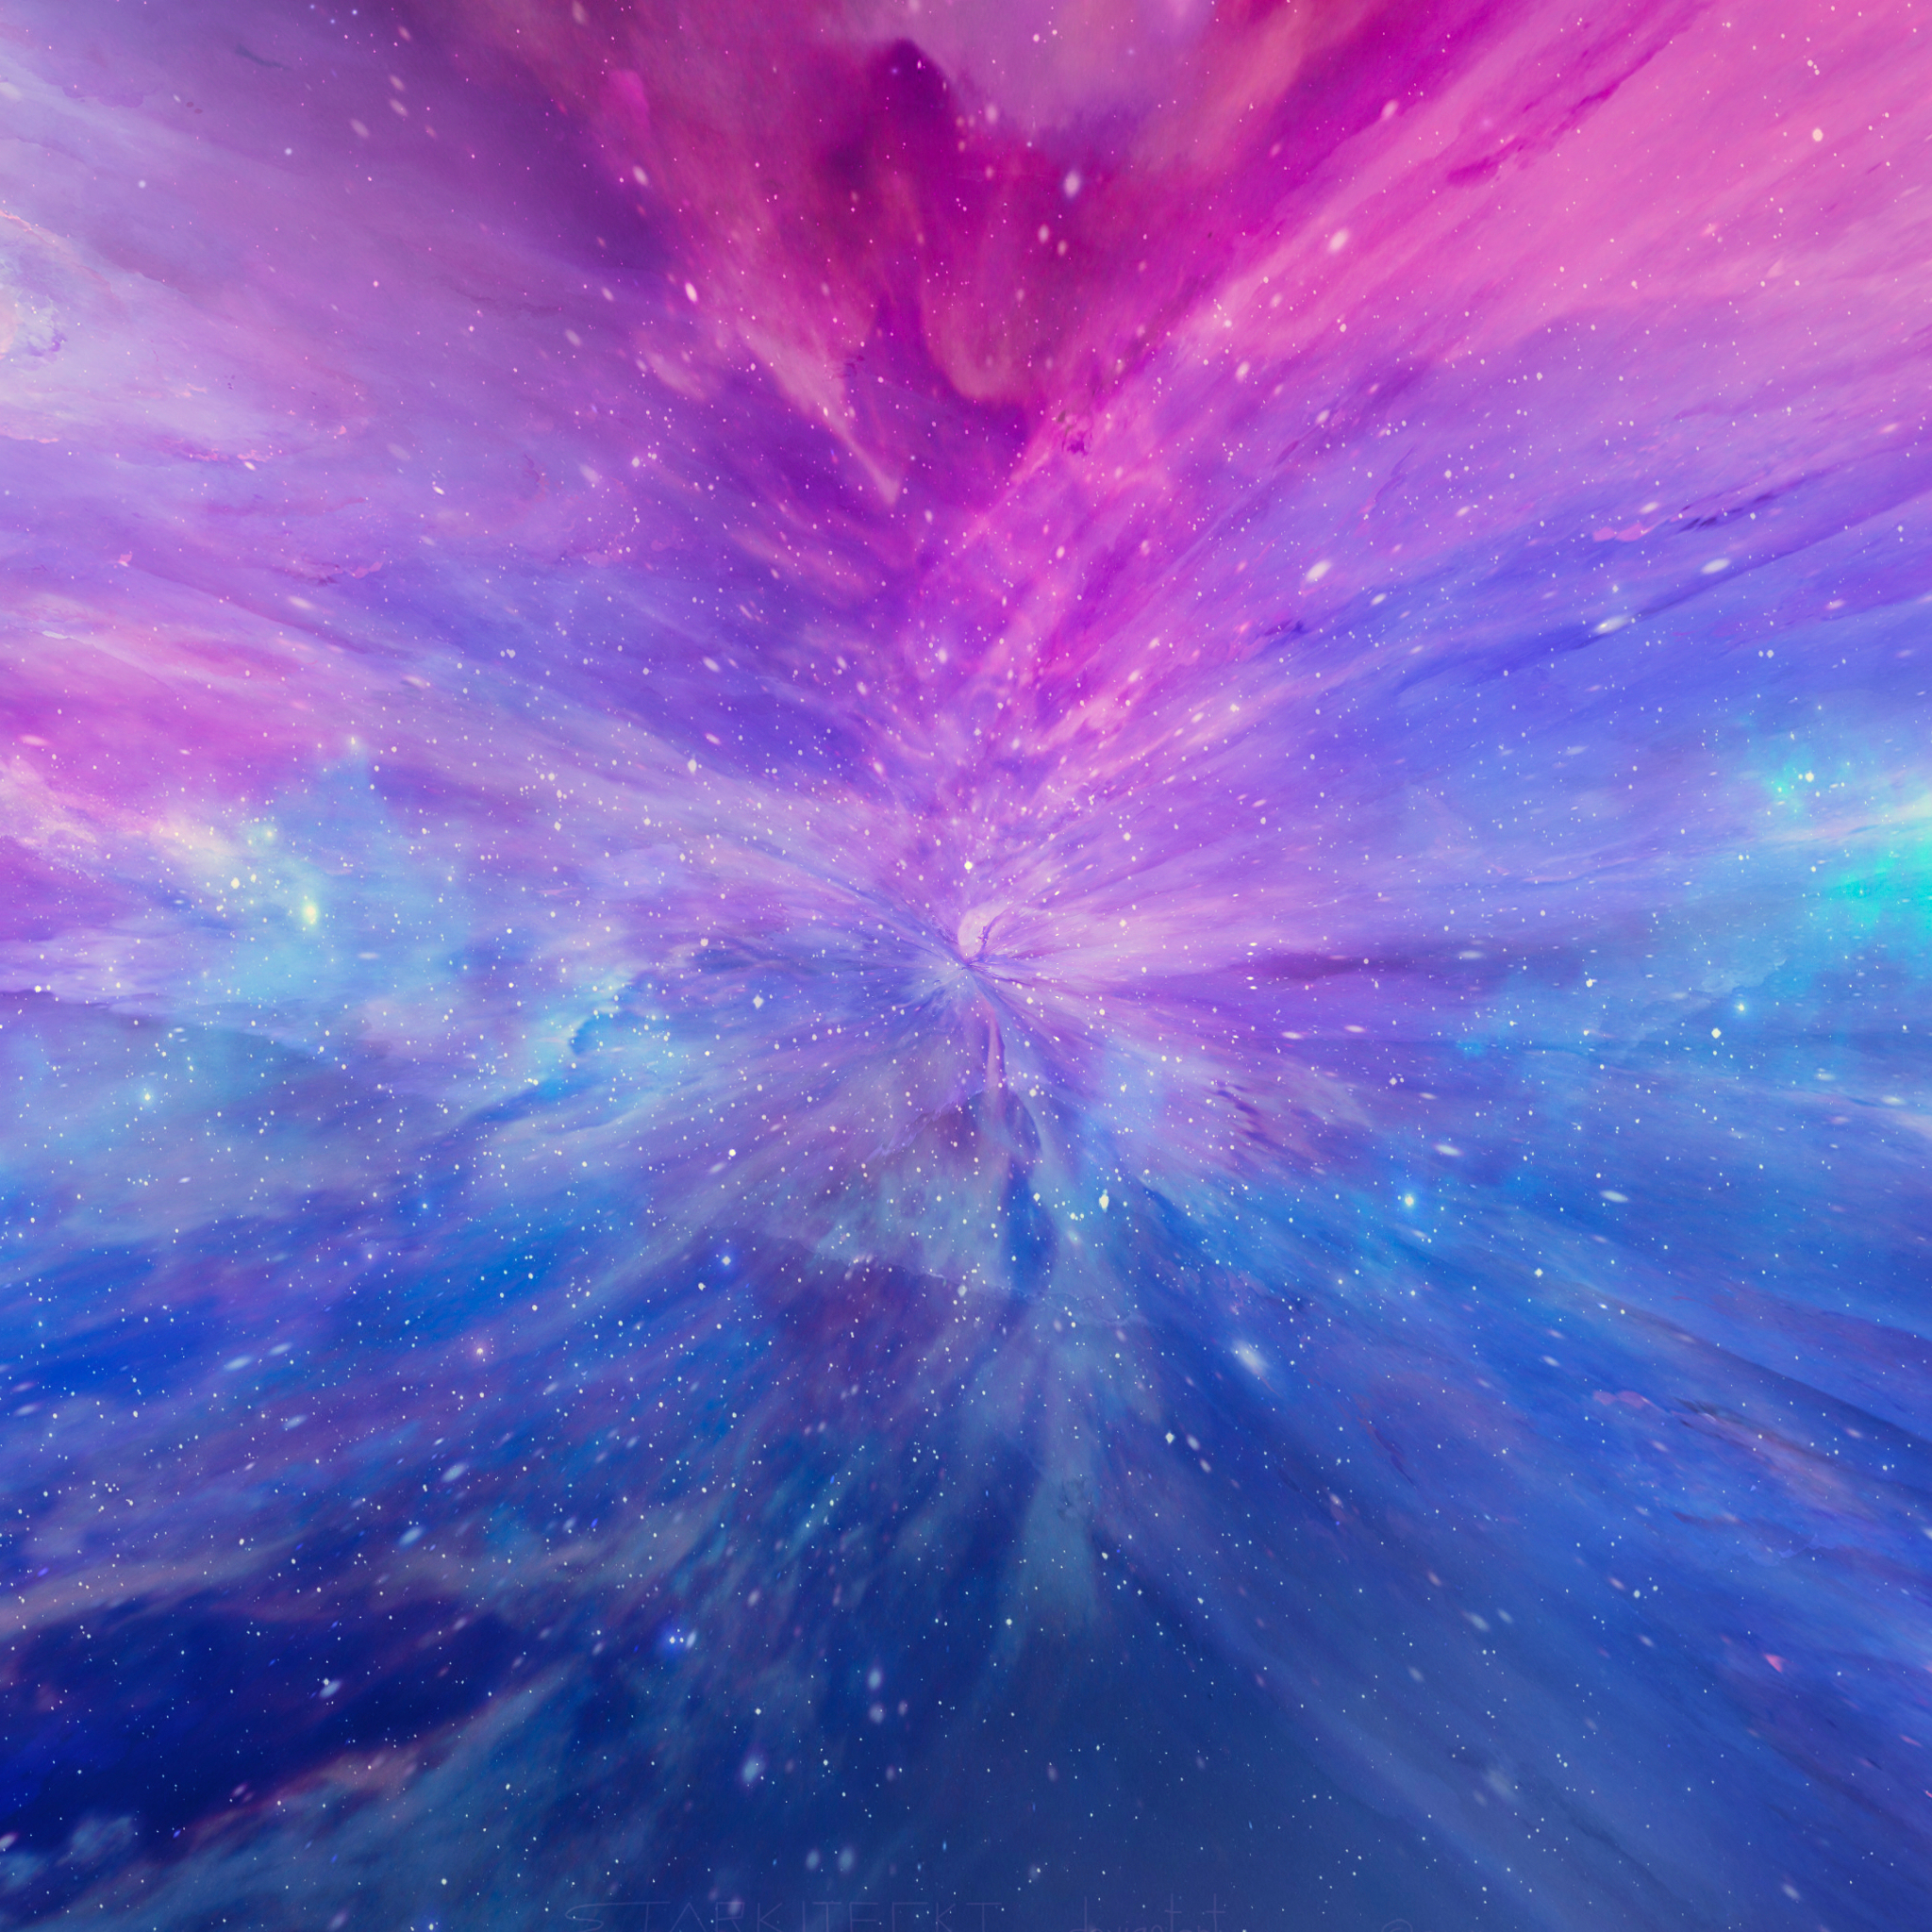 9 Wildly Colored Galactic Hd Wallpapers At 2048 2048 Resolution